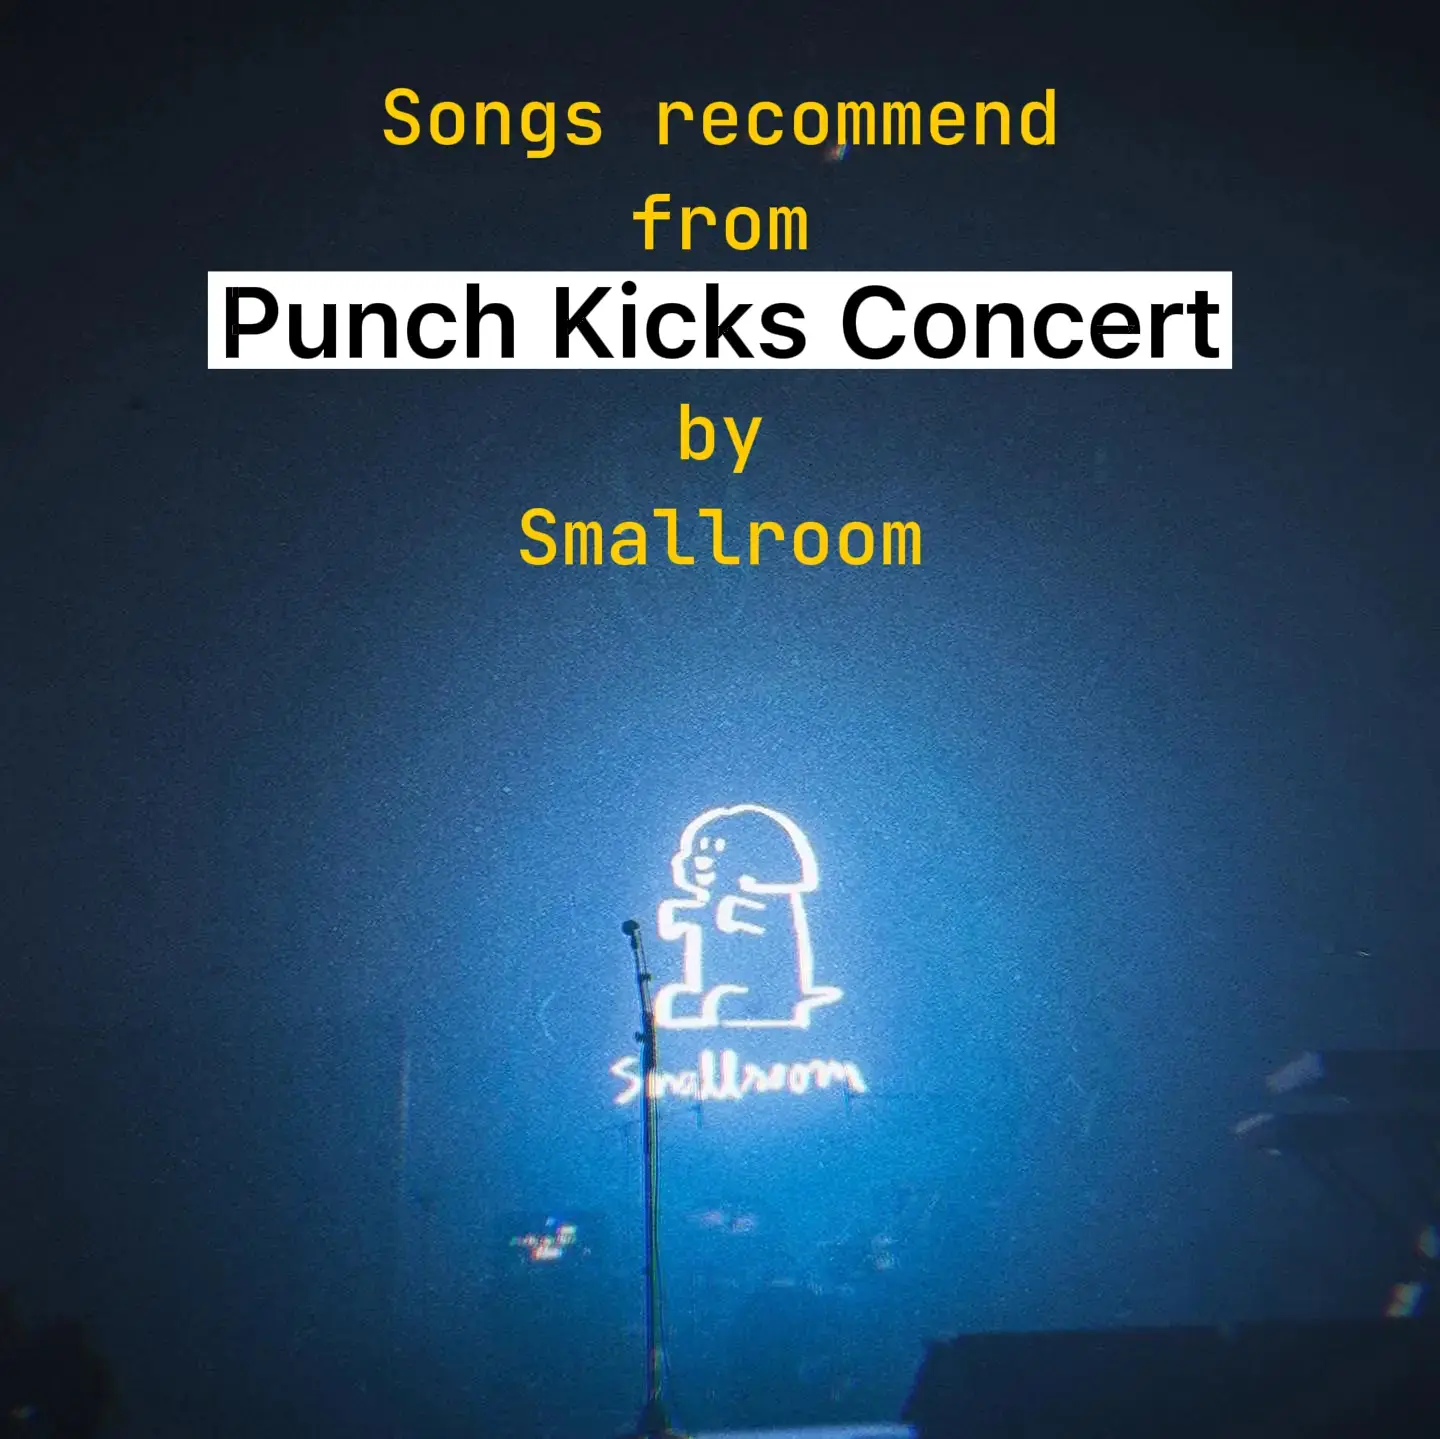 Includes good indie songs from Punch Kicks by Smallroom. | Gallery